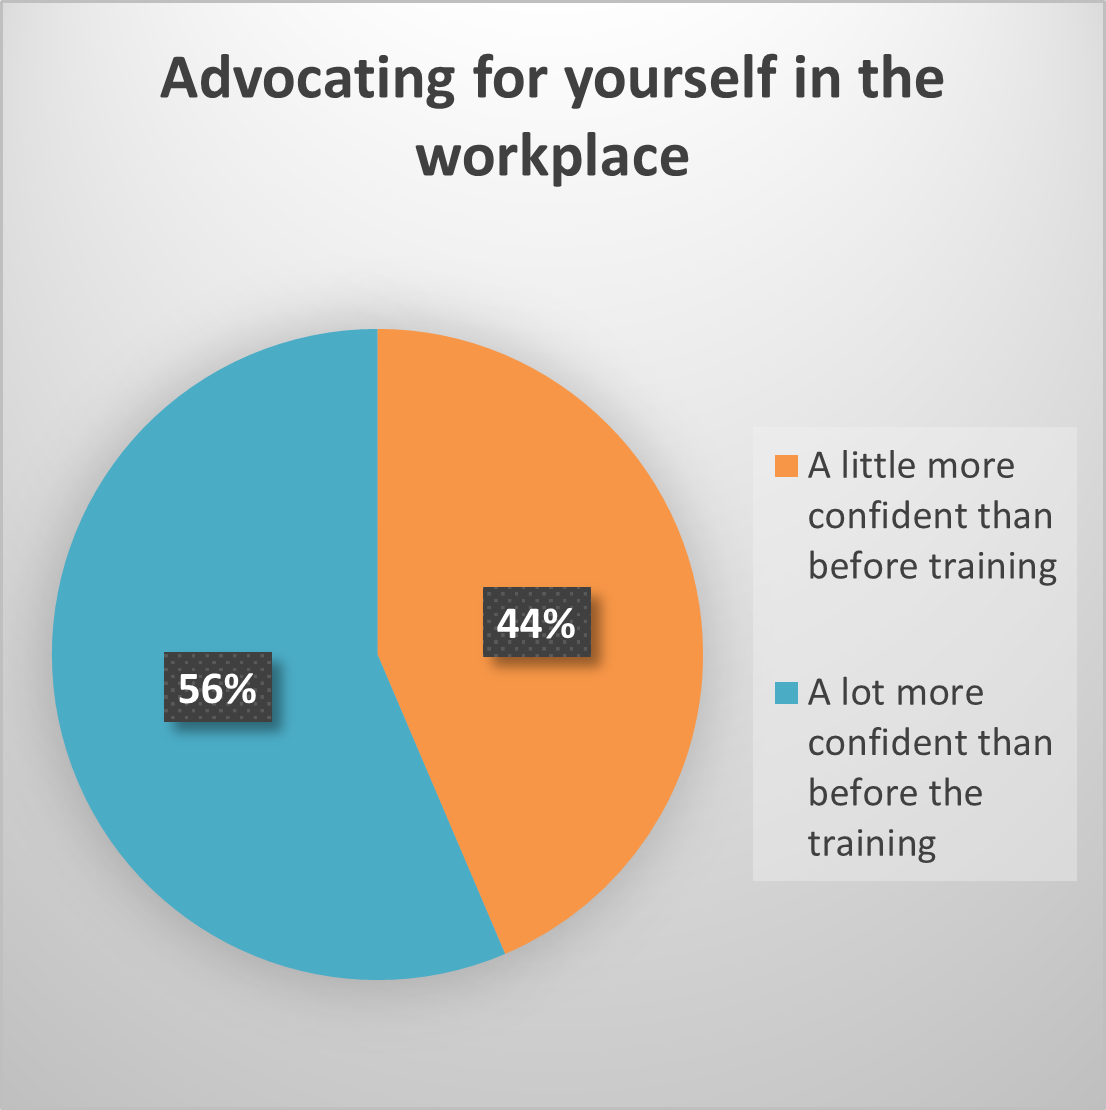 adovcating for yourself in the workplace.png